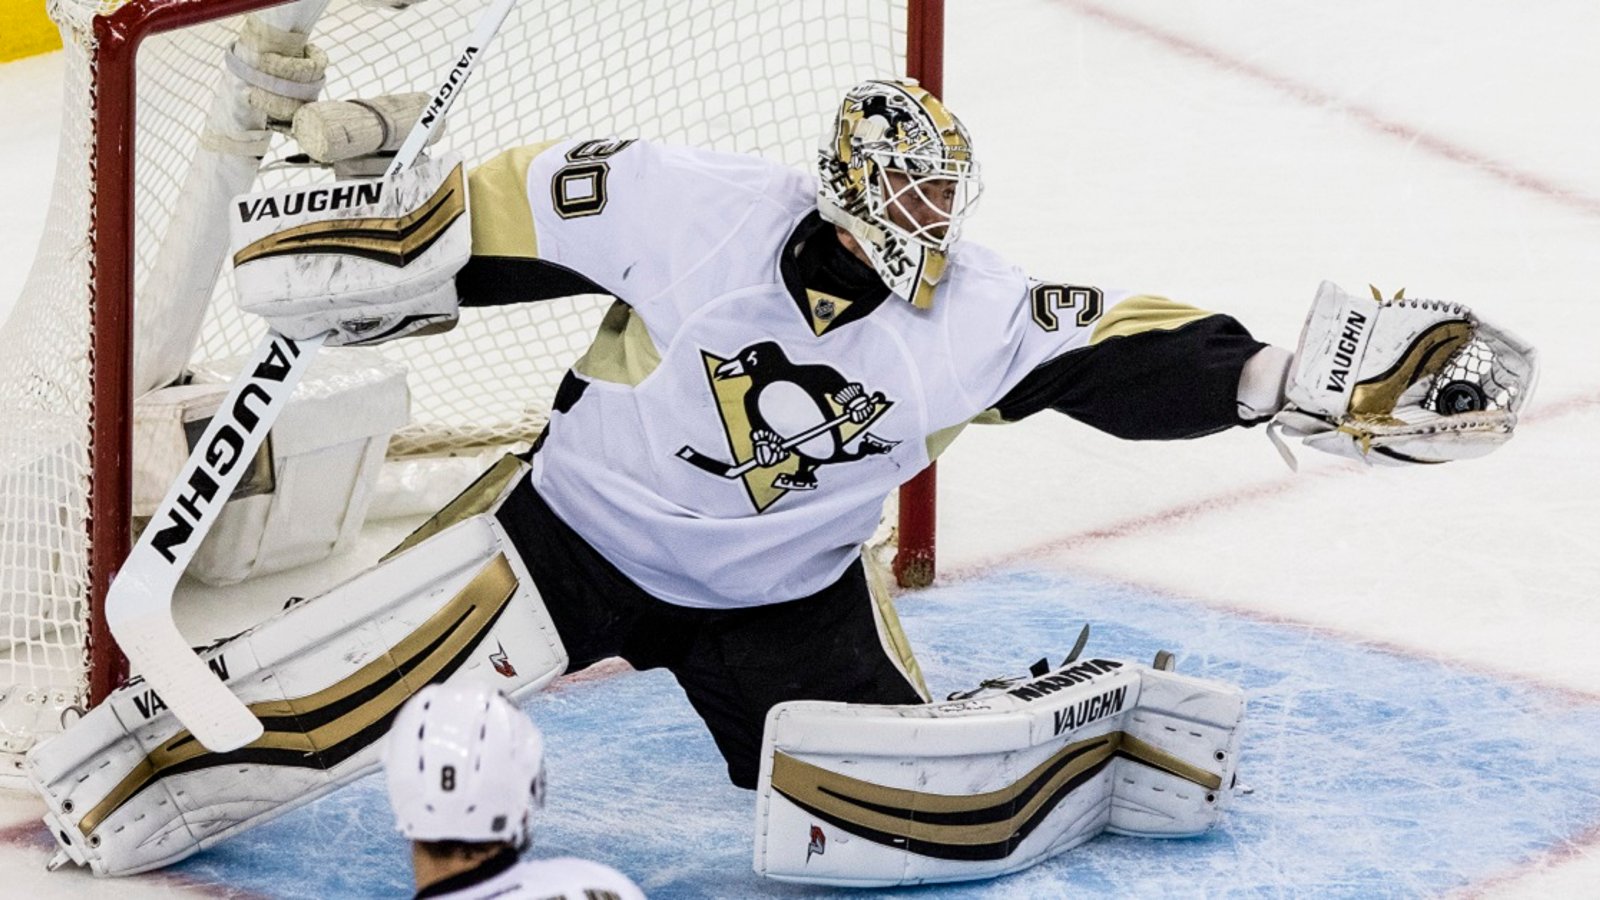 Accusations that the NHL is putting goalies at risk to promote more goals.